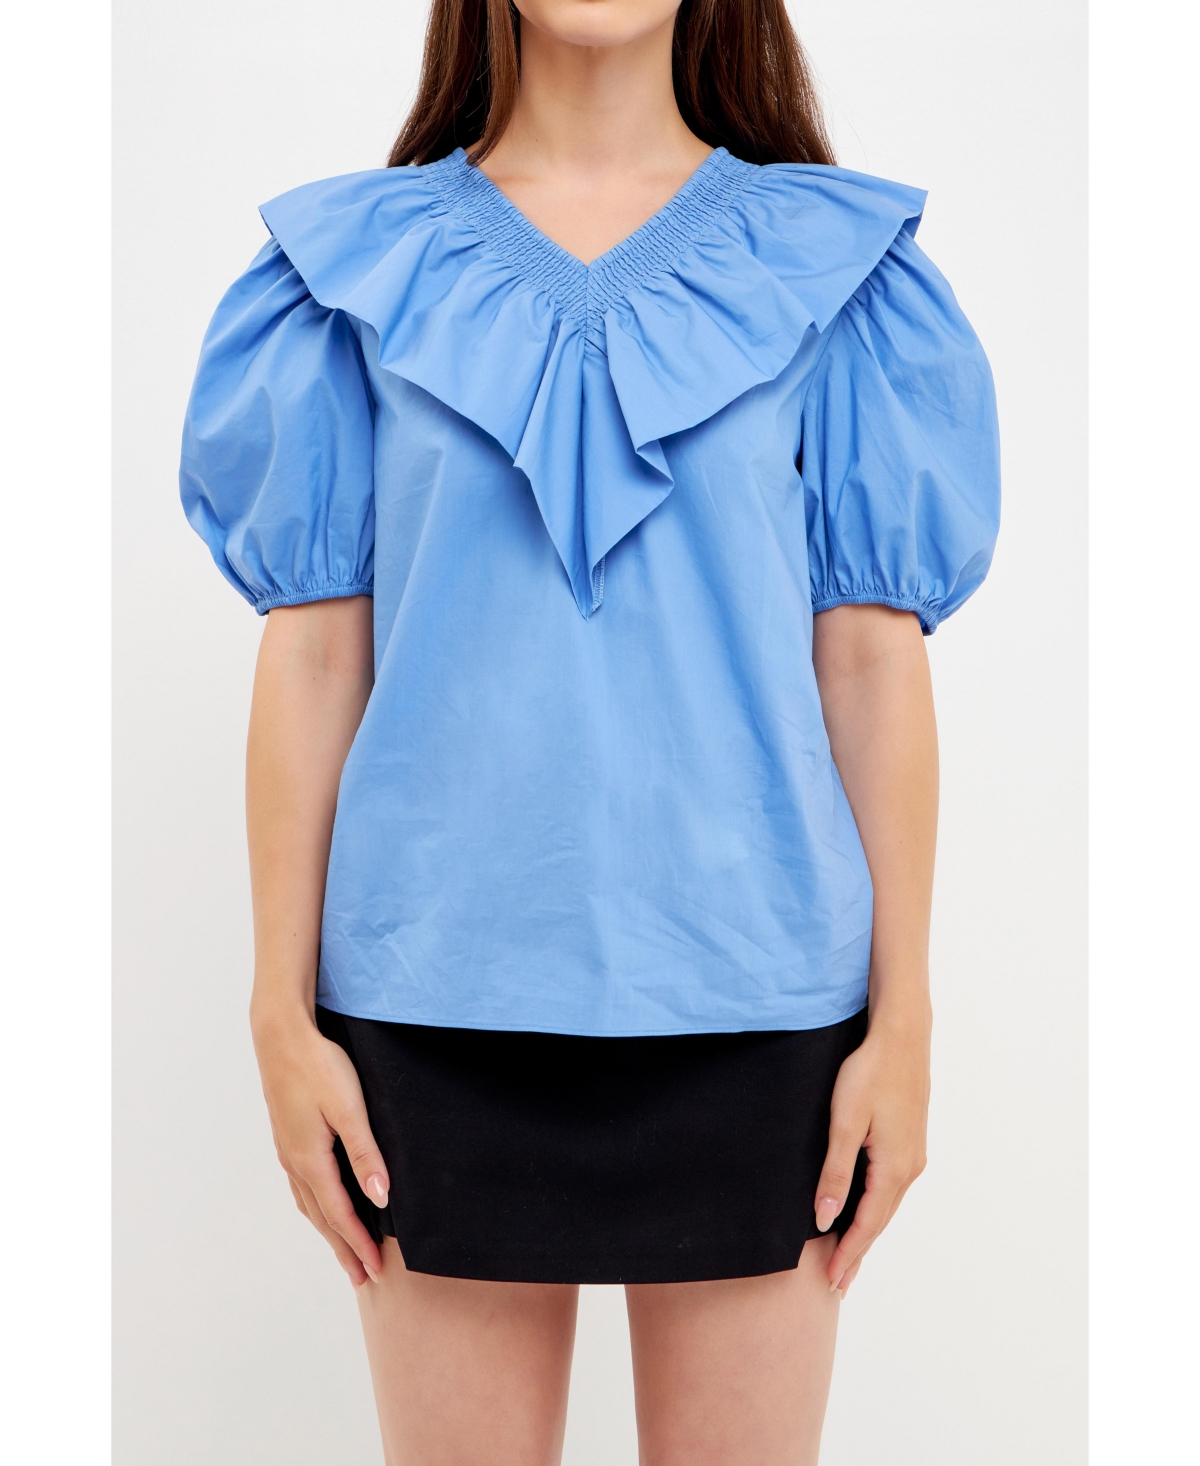 Women's Smocked Ruffled Puff Sleeve Top - Oxford blue